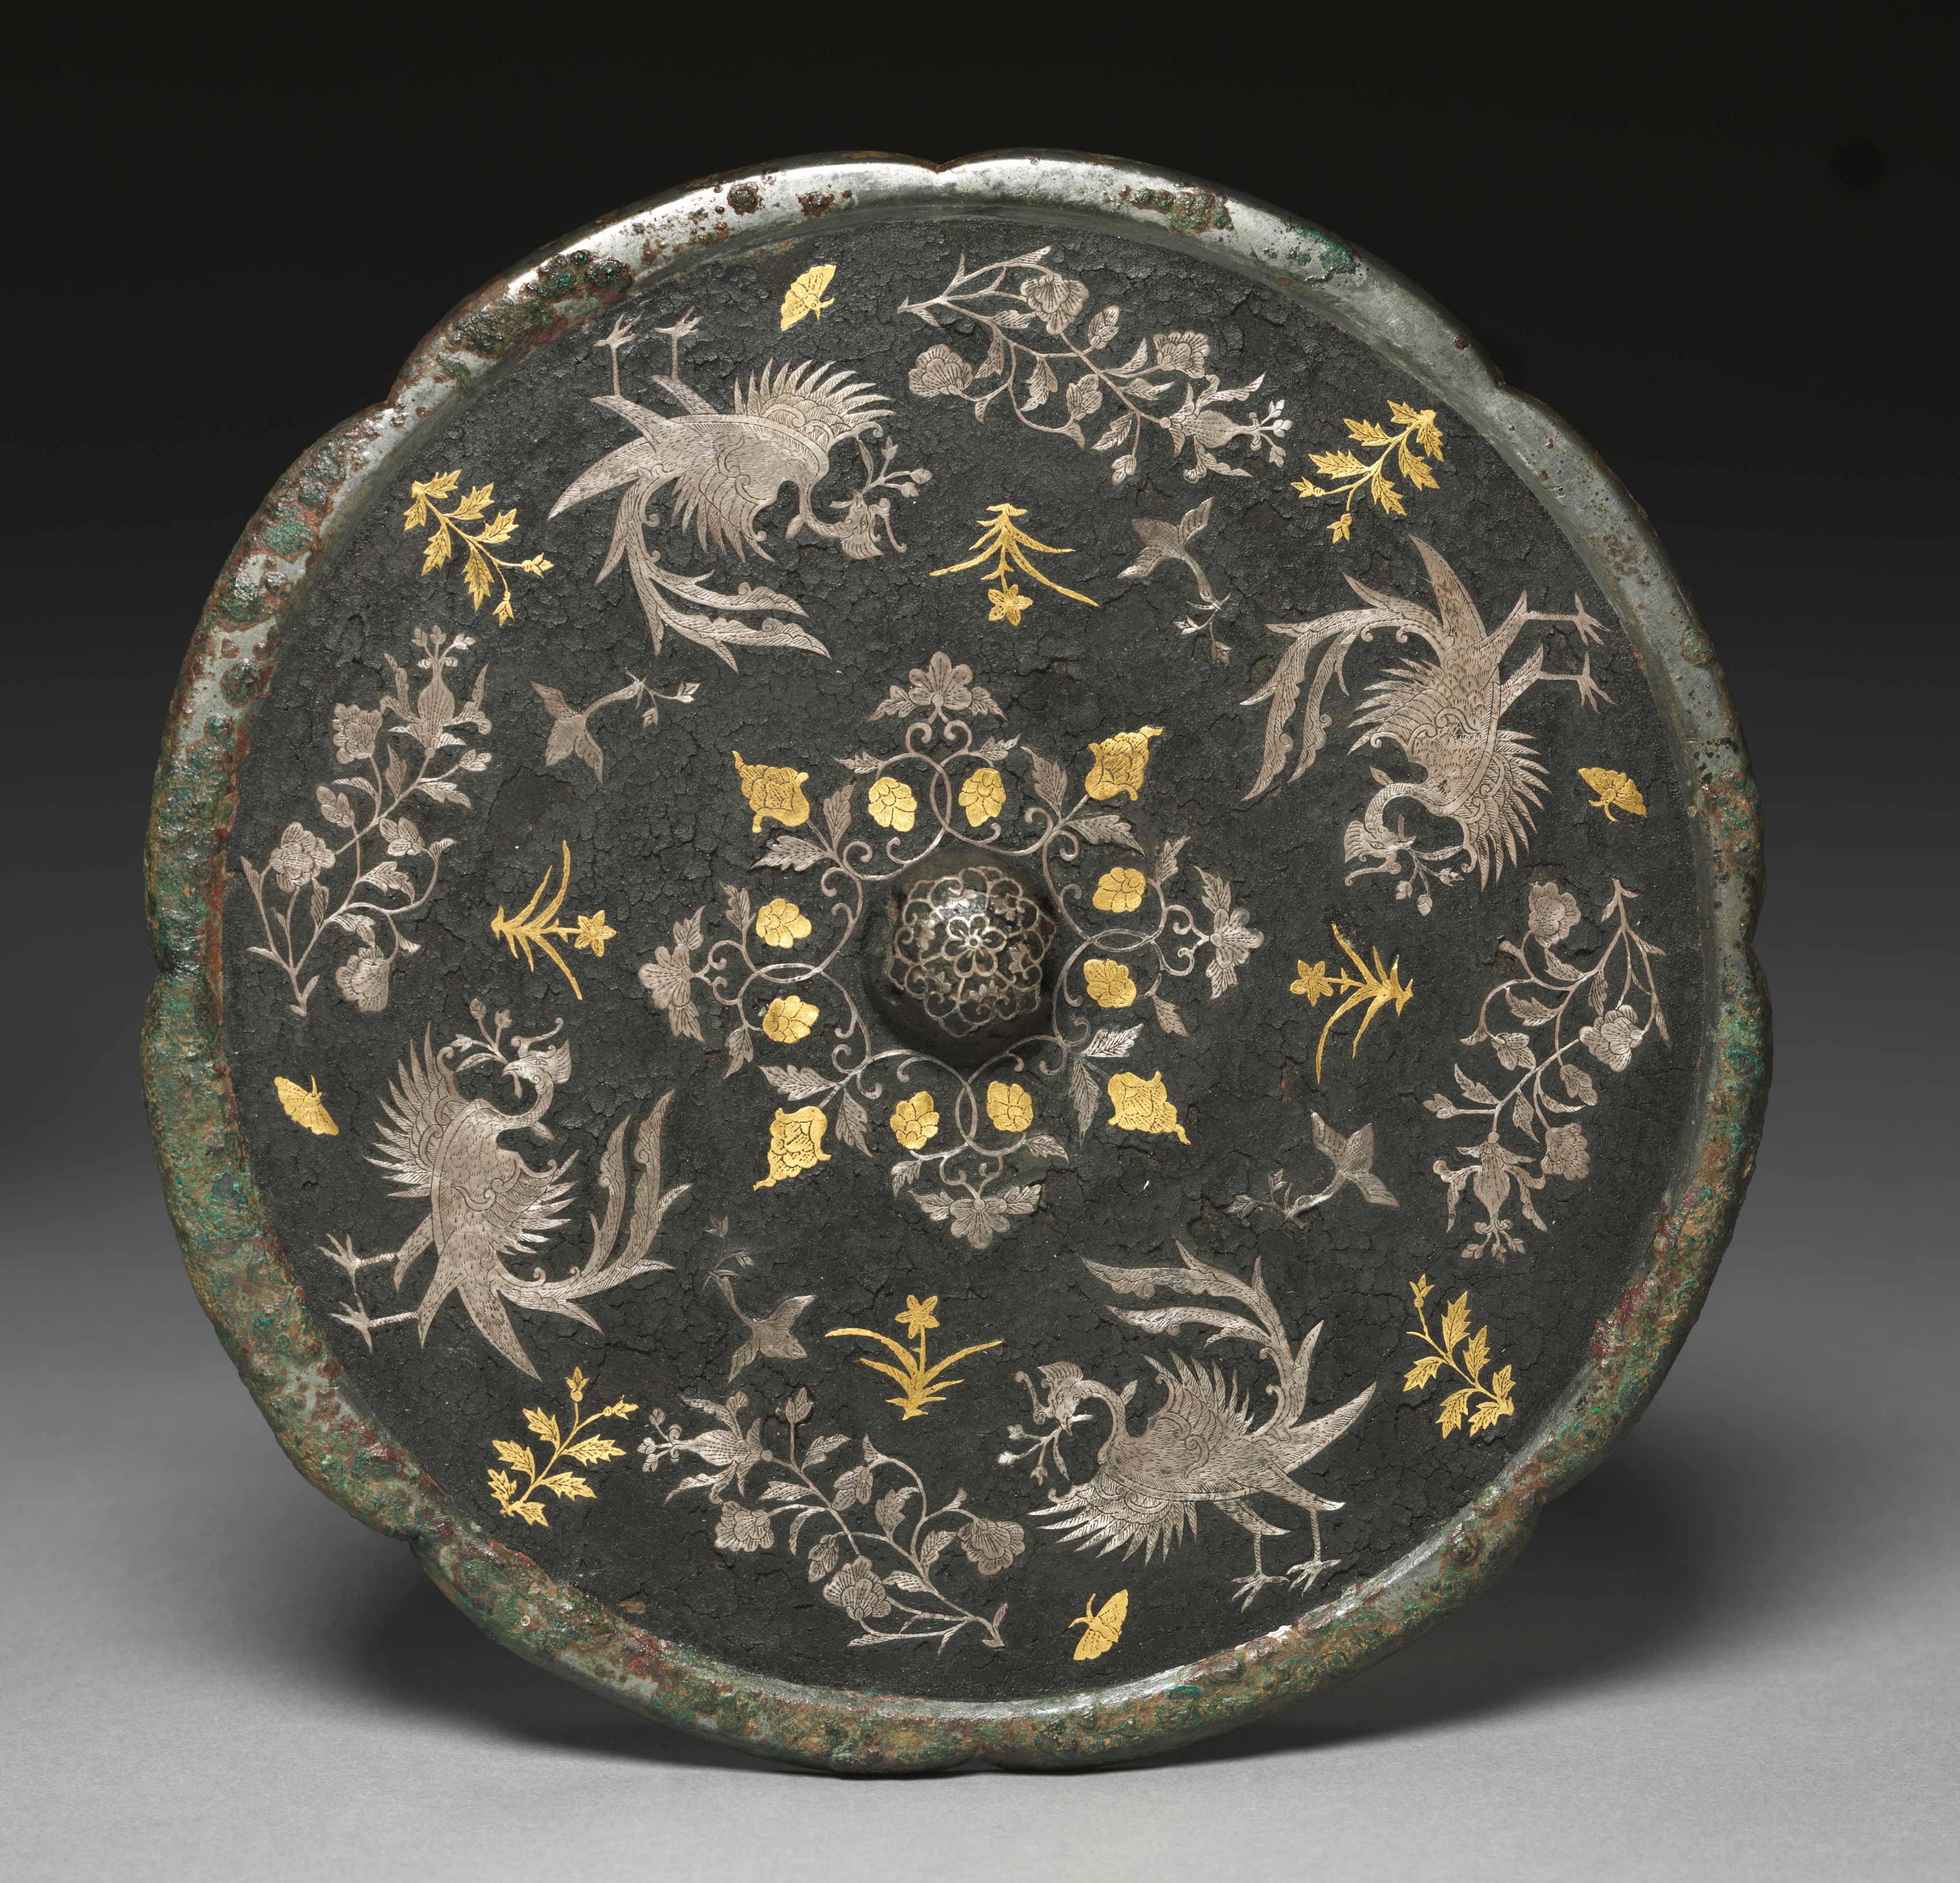 Mirror with Phoenixes, Birds, Butterflies, and Floral Sprays